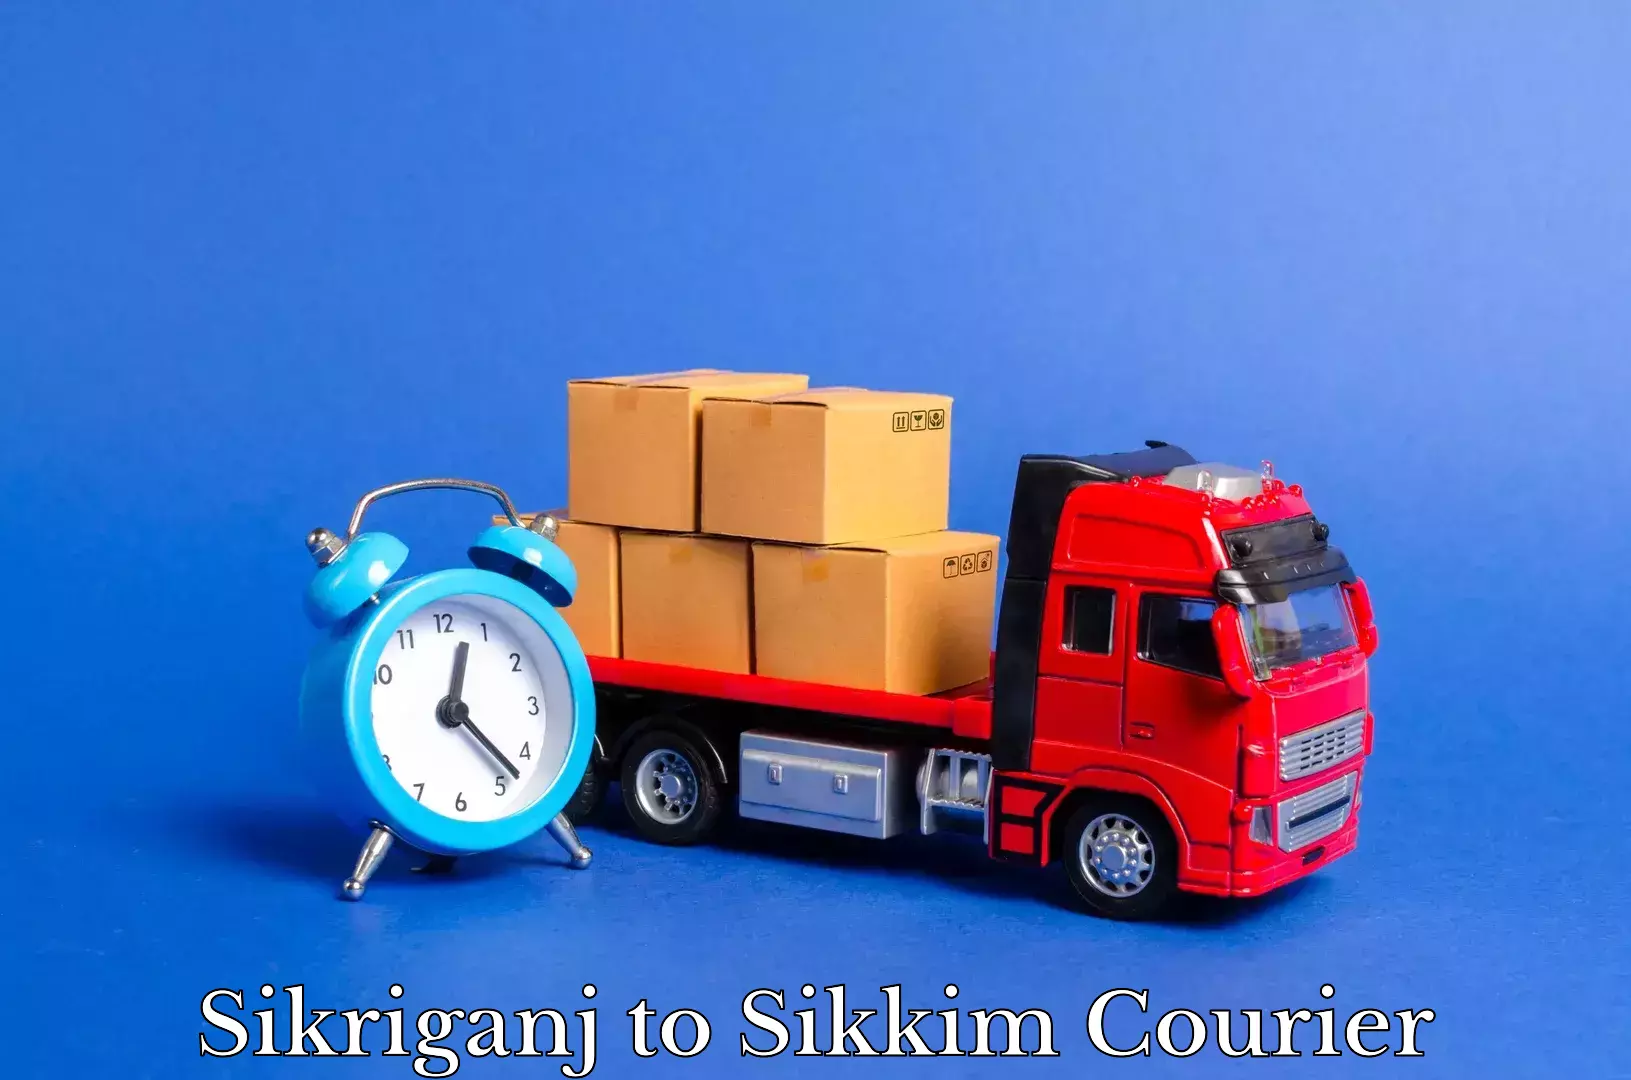 Trusted relocation services Sikriganj to Ravangla